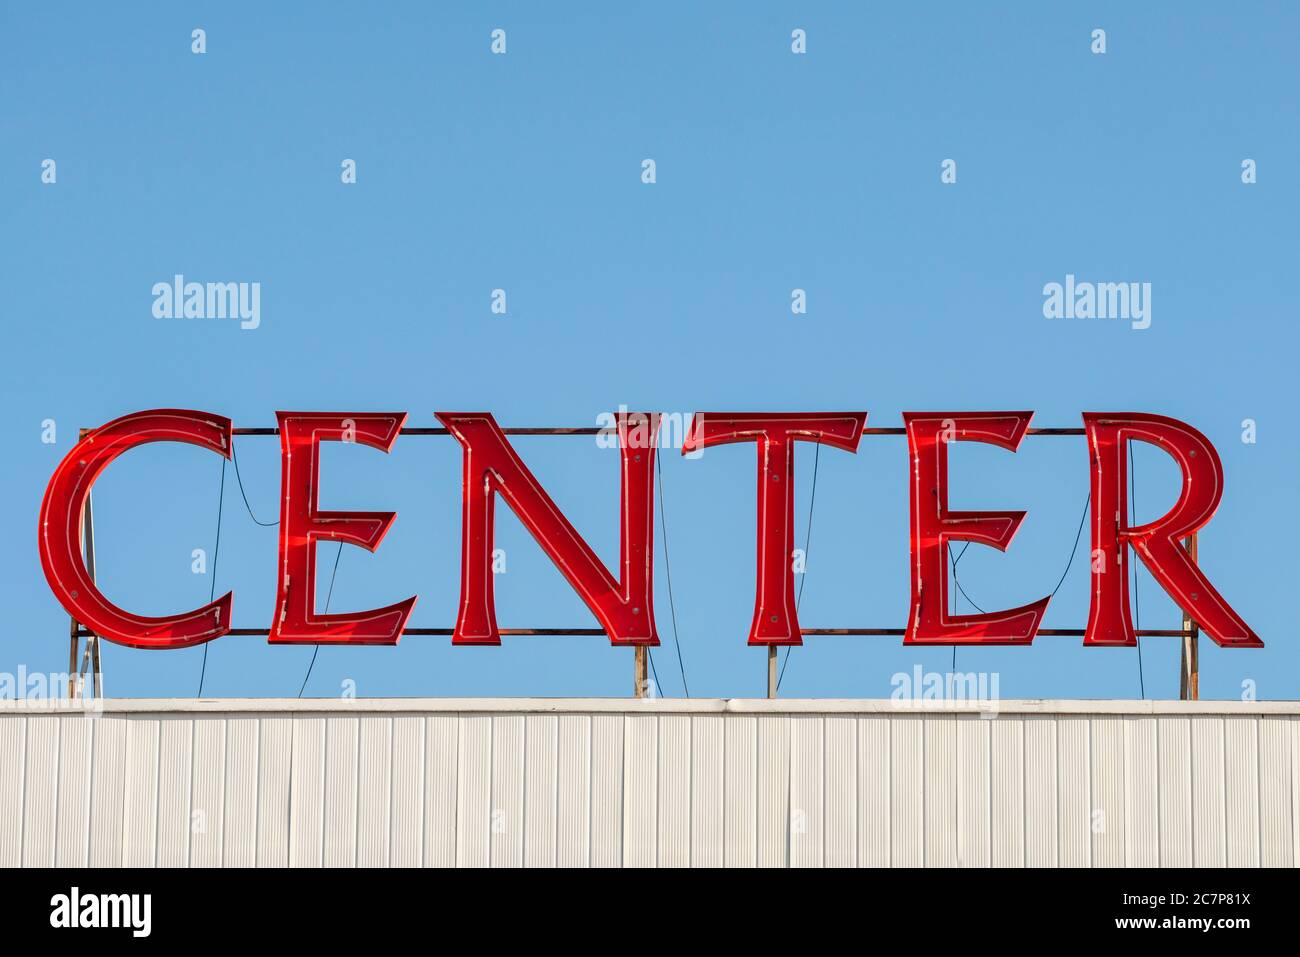 Luminous and vivid Center writing and red LED neon logo sign on building roof against blue sky Stock Photo